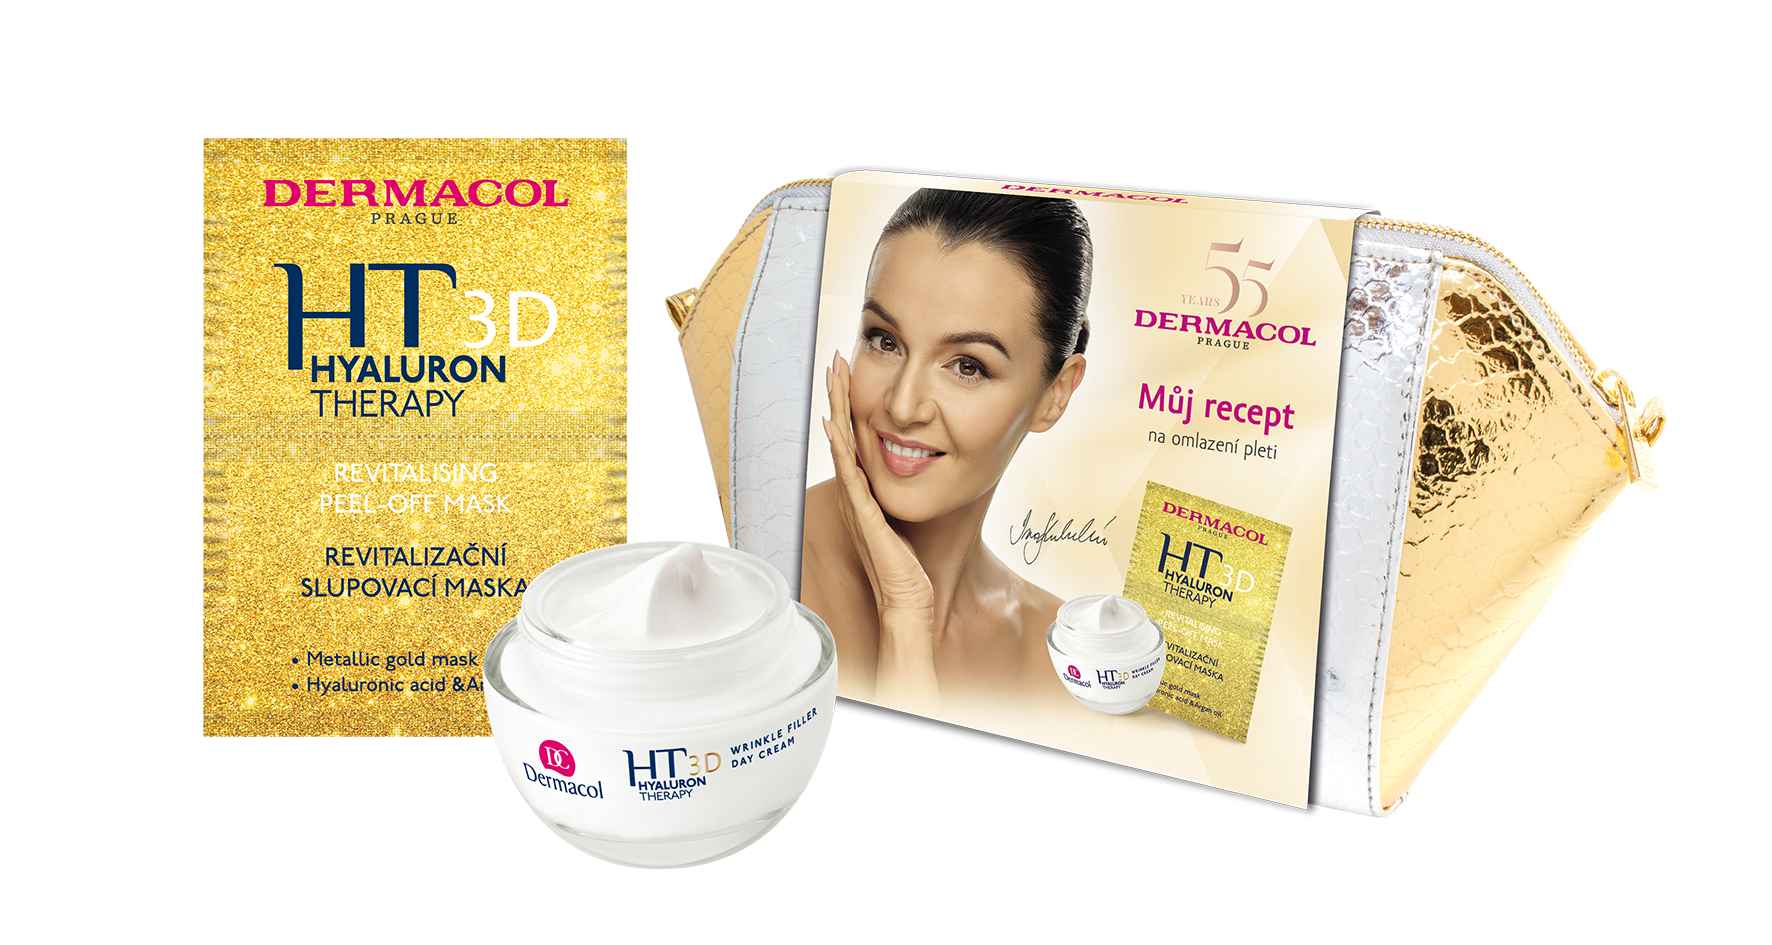 Dermacol DB Hyaluron Therapy 3D III.